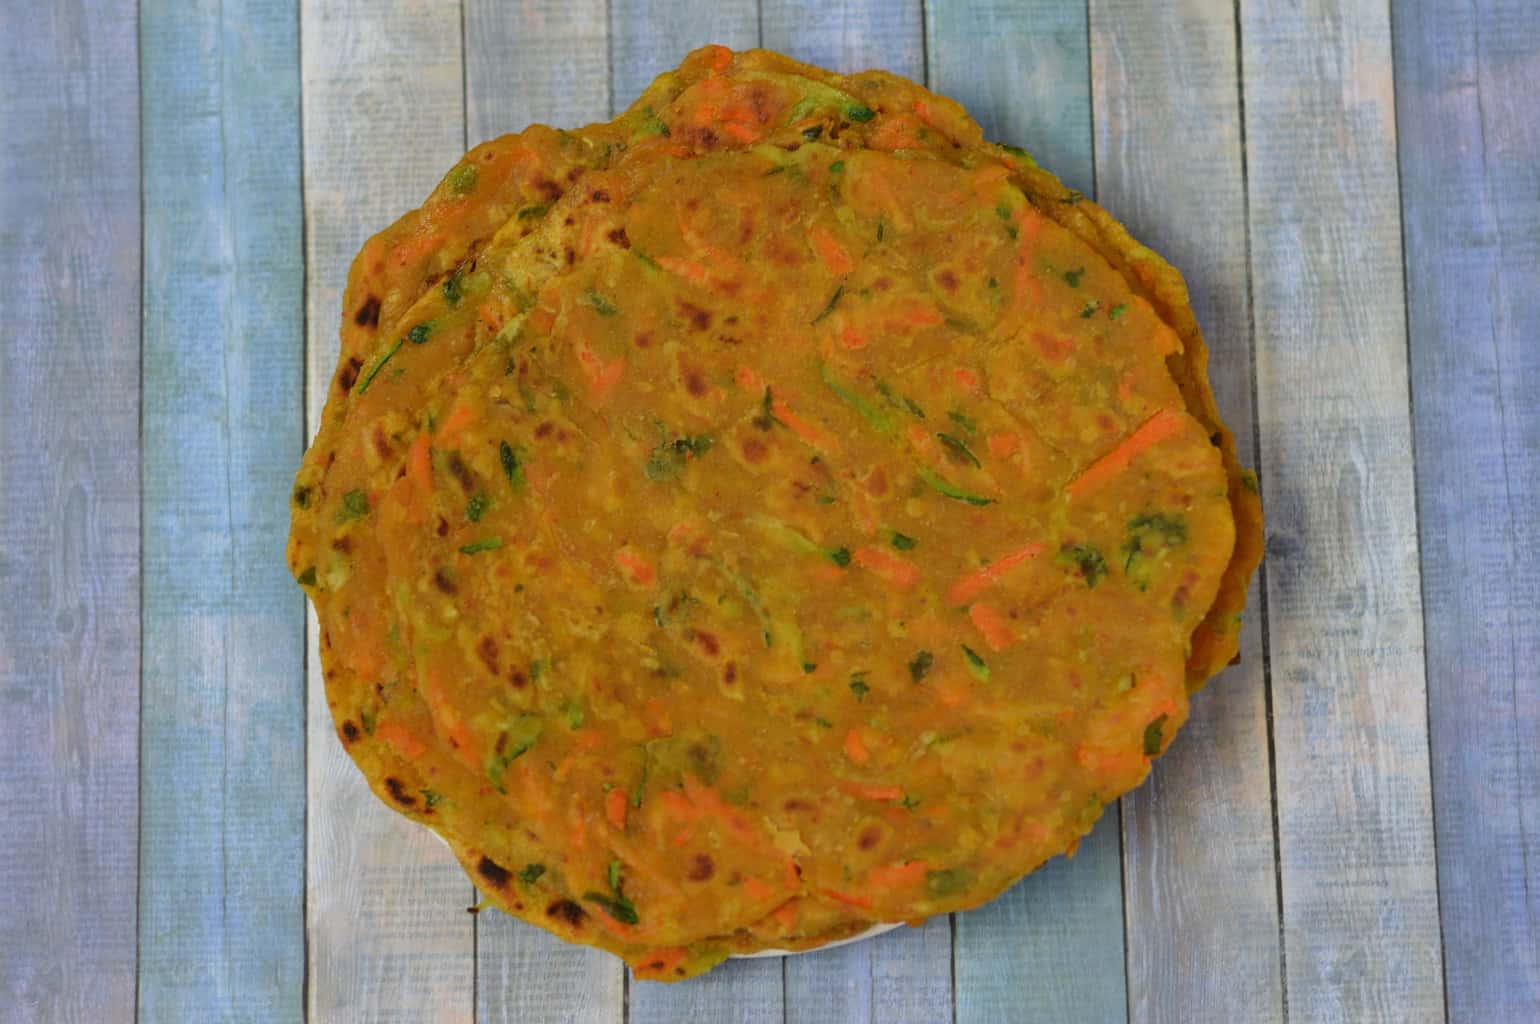 Zucchini Carrot Paratha is a simple and nutritious Indian flat bread that is made from grated zucchini ,carrots ,few spices and whole wheat flour